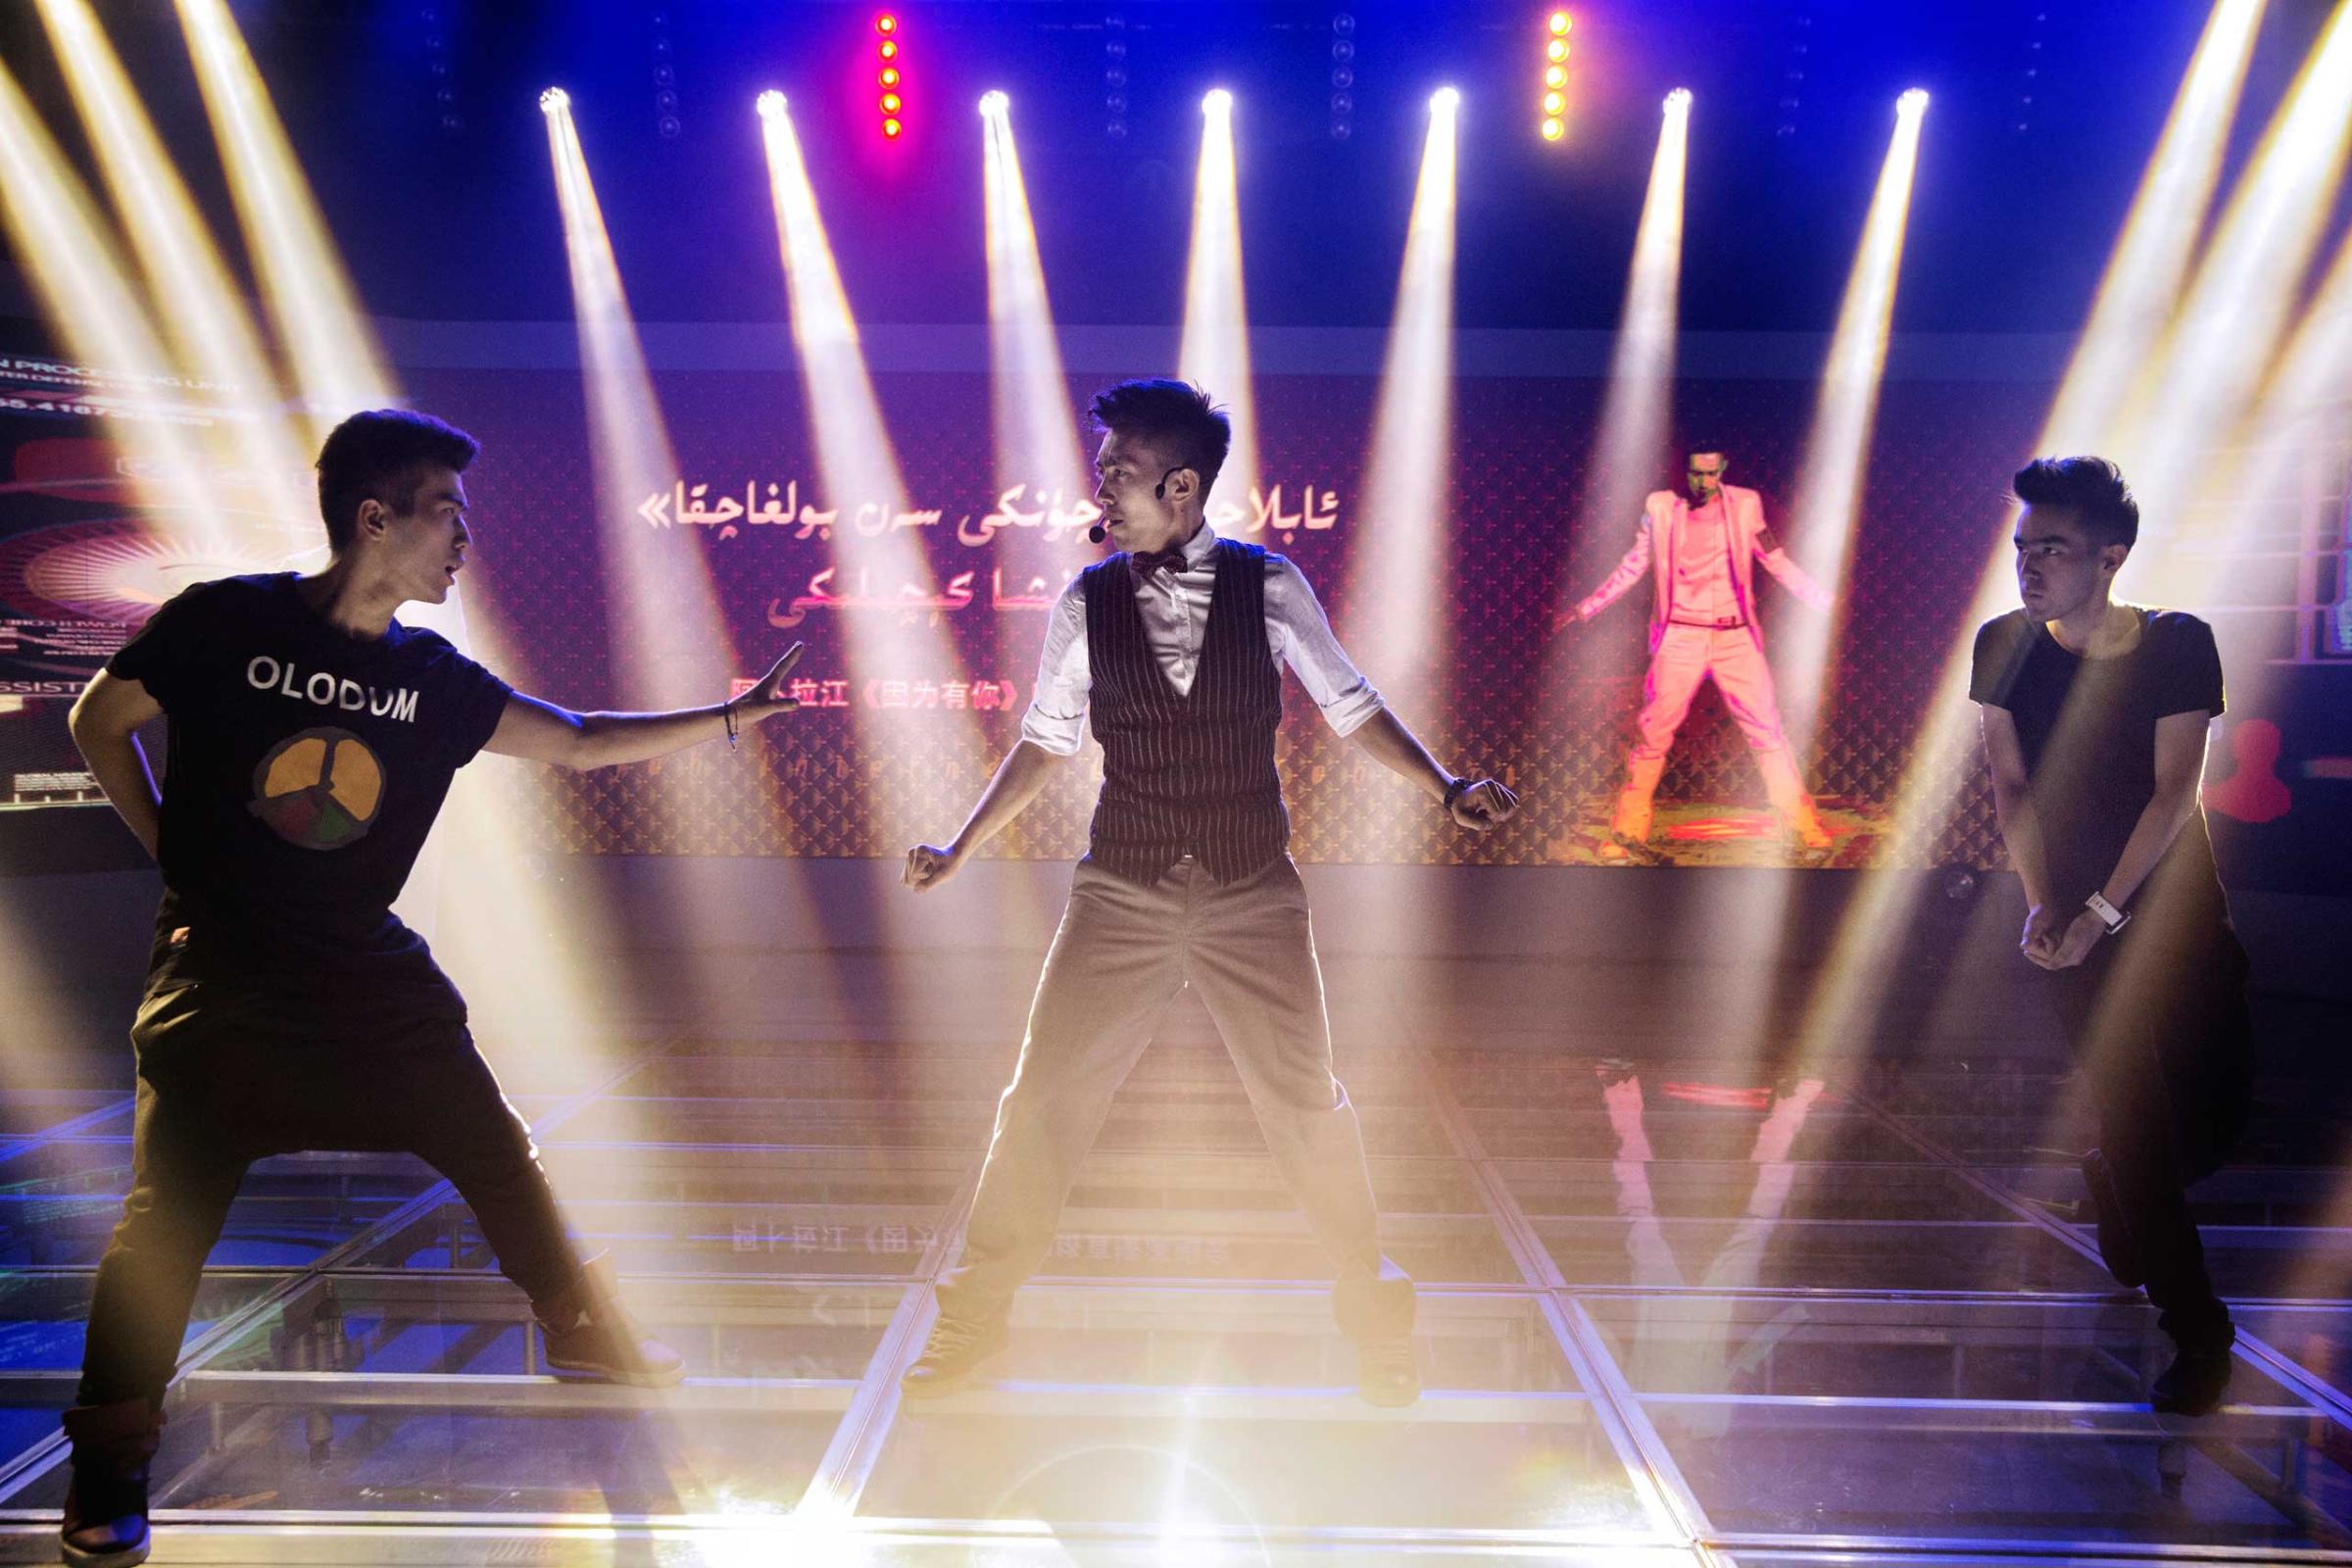 Ablajan performs on stage with his dancers at rehearsals for a planned live webcast concert scheduled for that afternoon in Urumqi, China on July 31st, 2014.